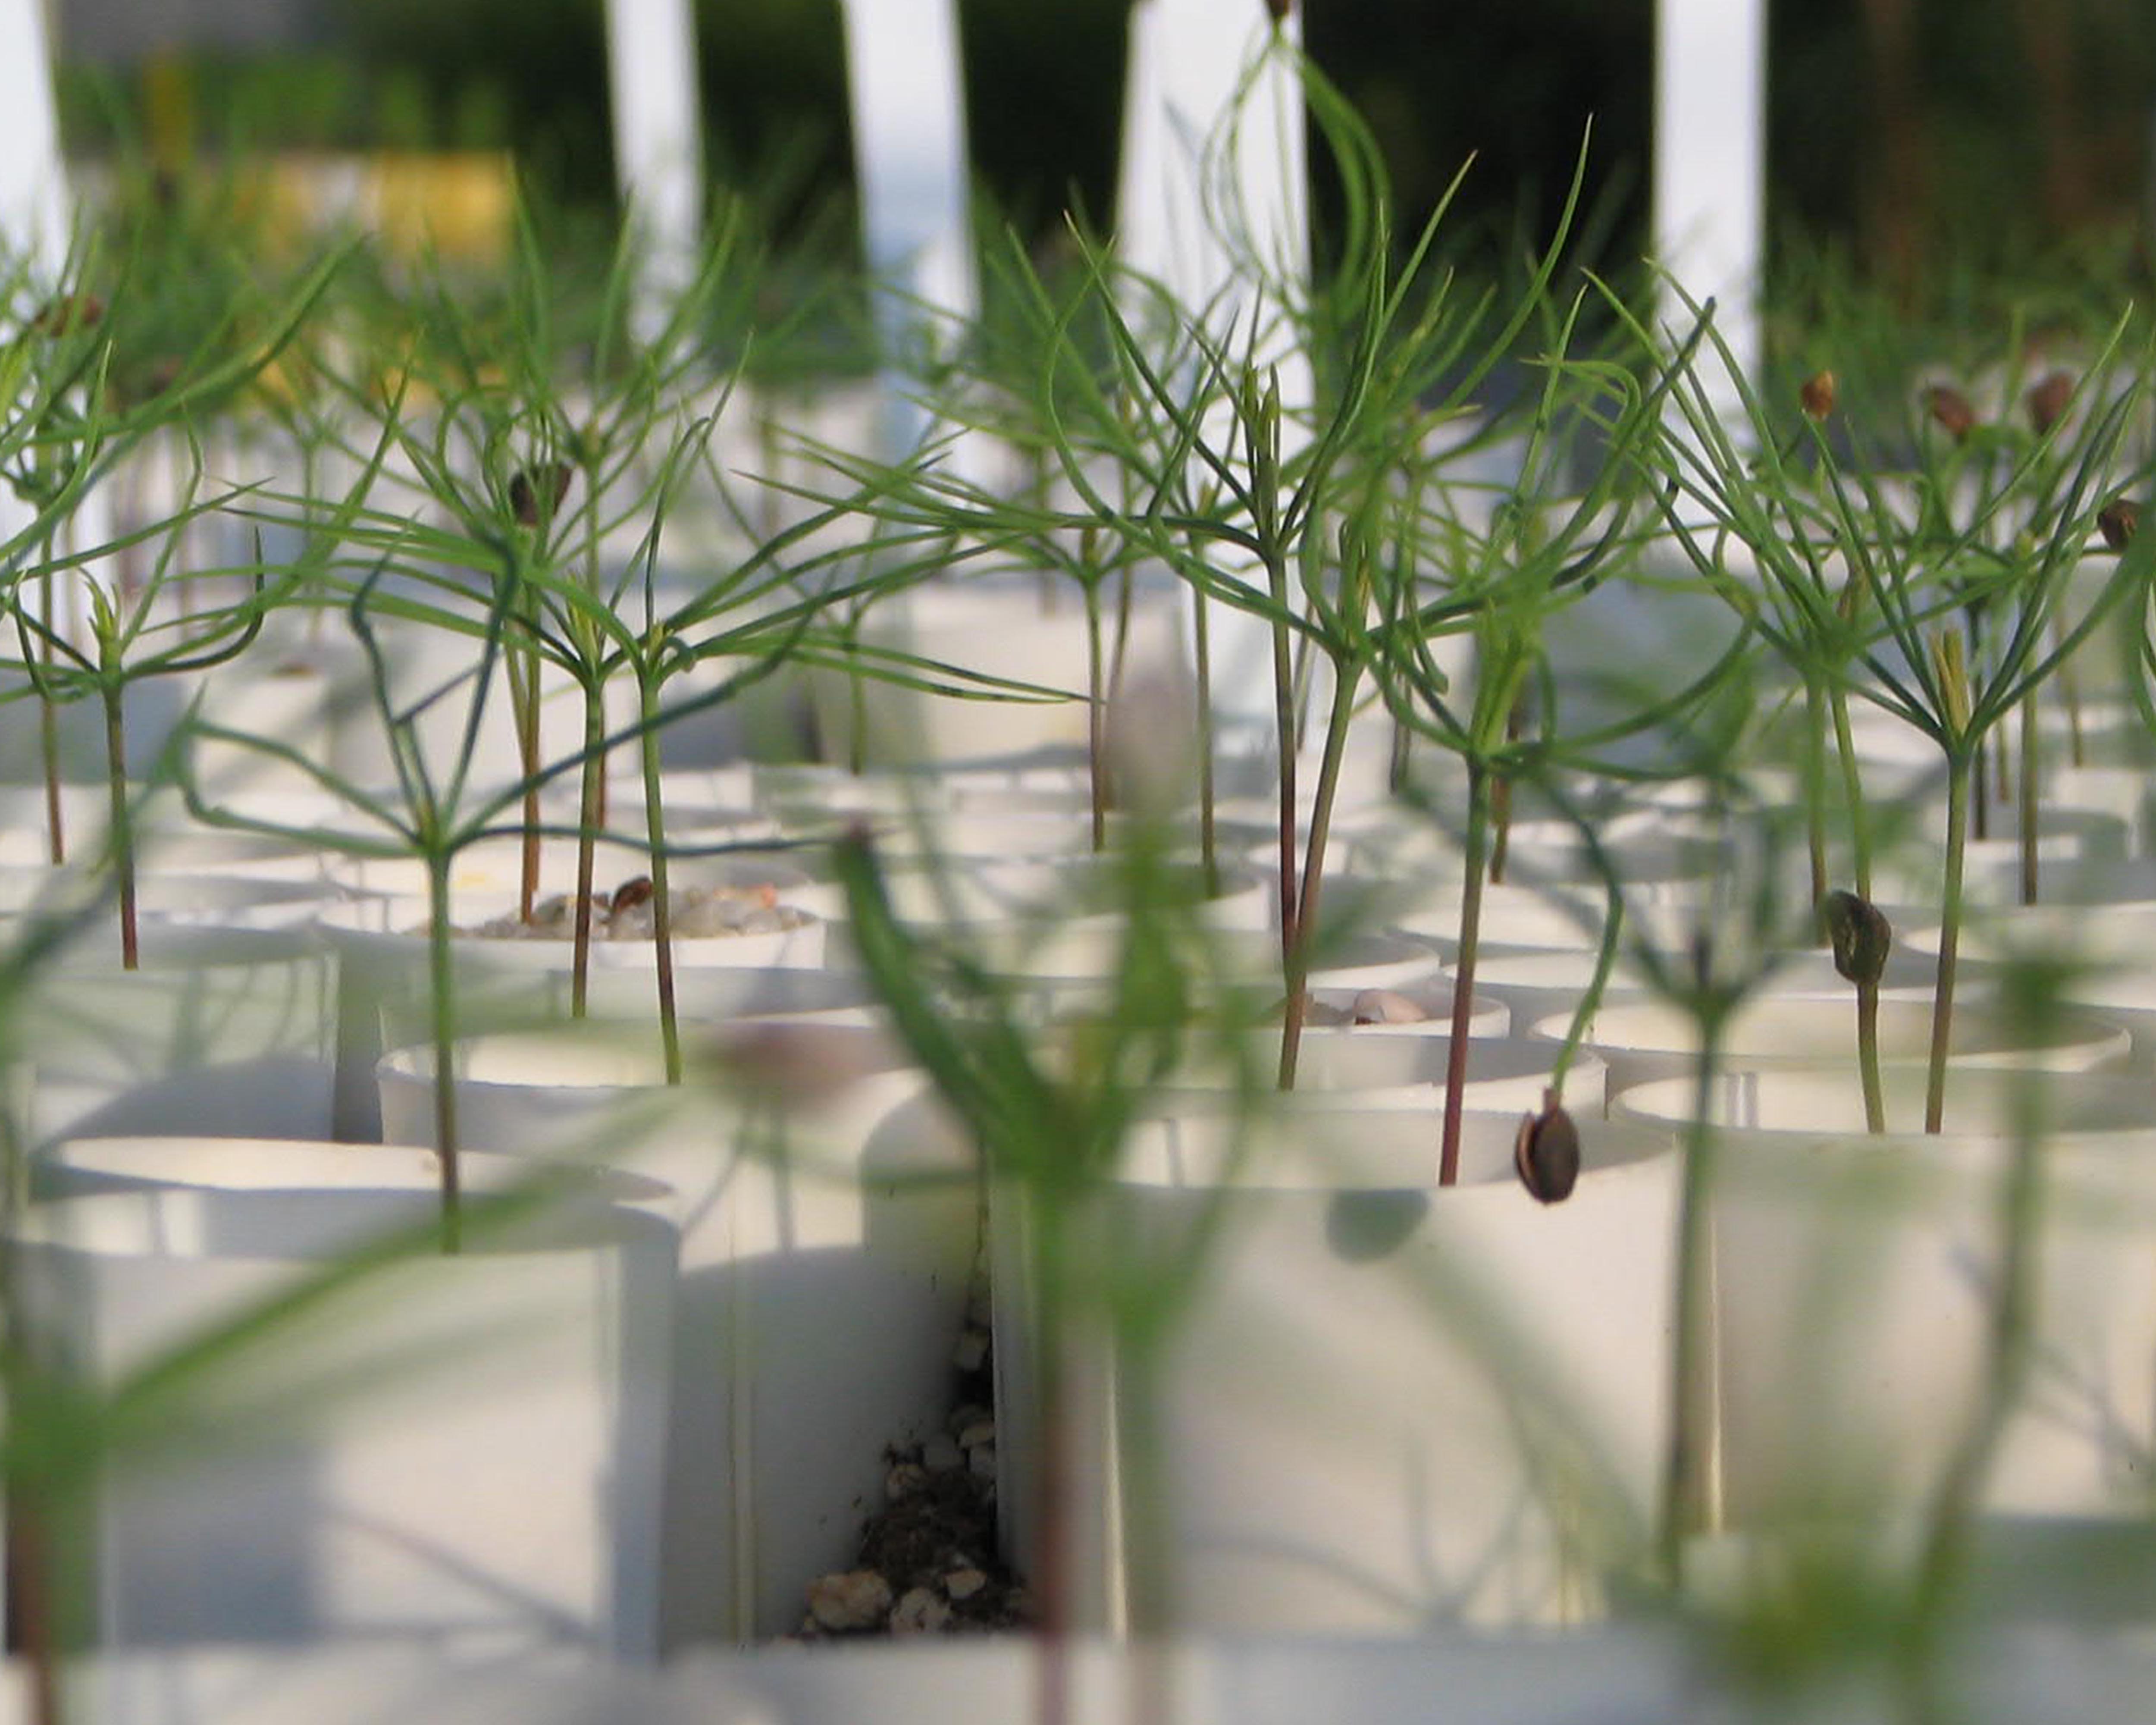 Approximately 26% of forest tree seedlings produced are grown in containers.